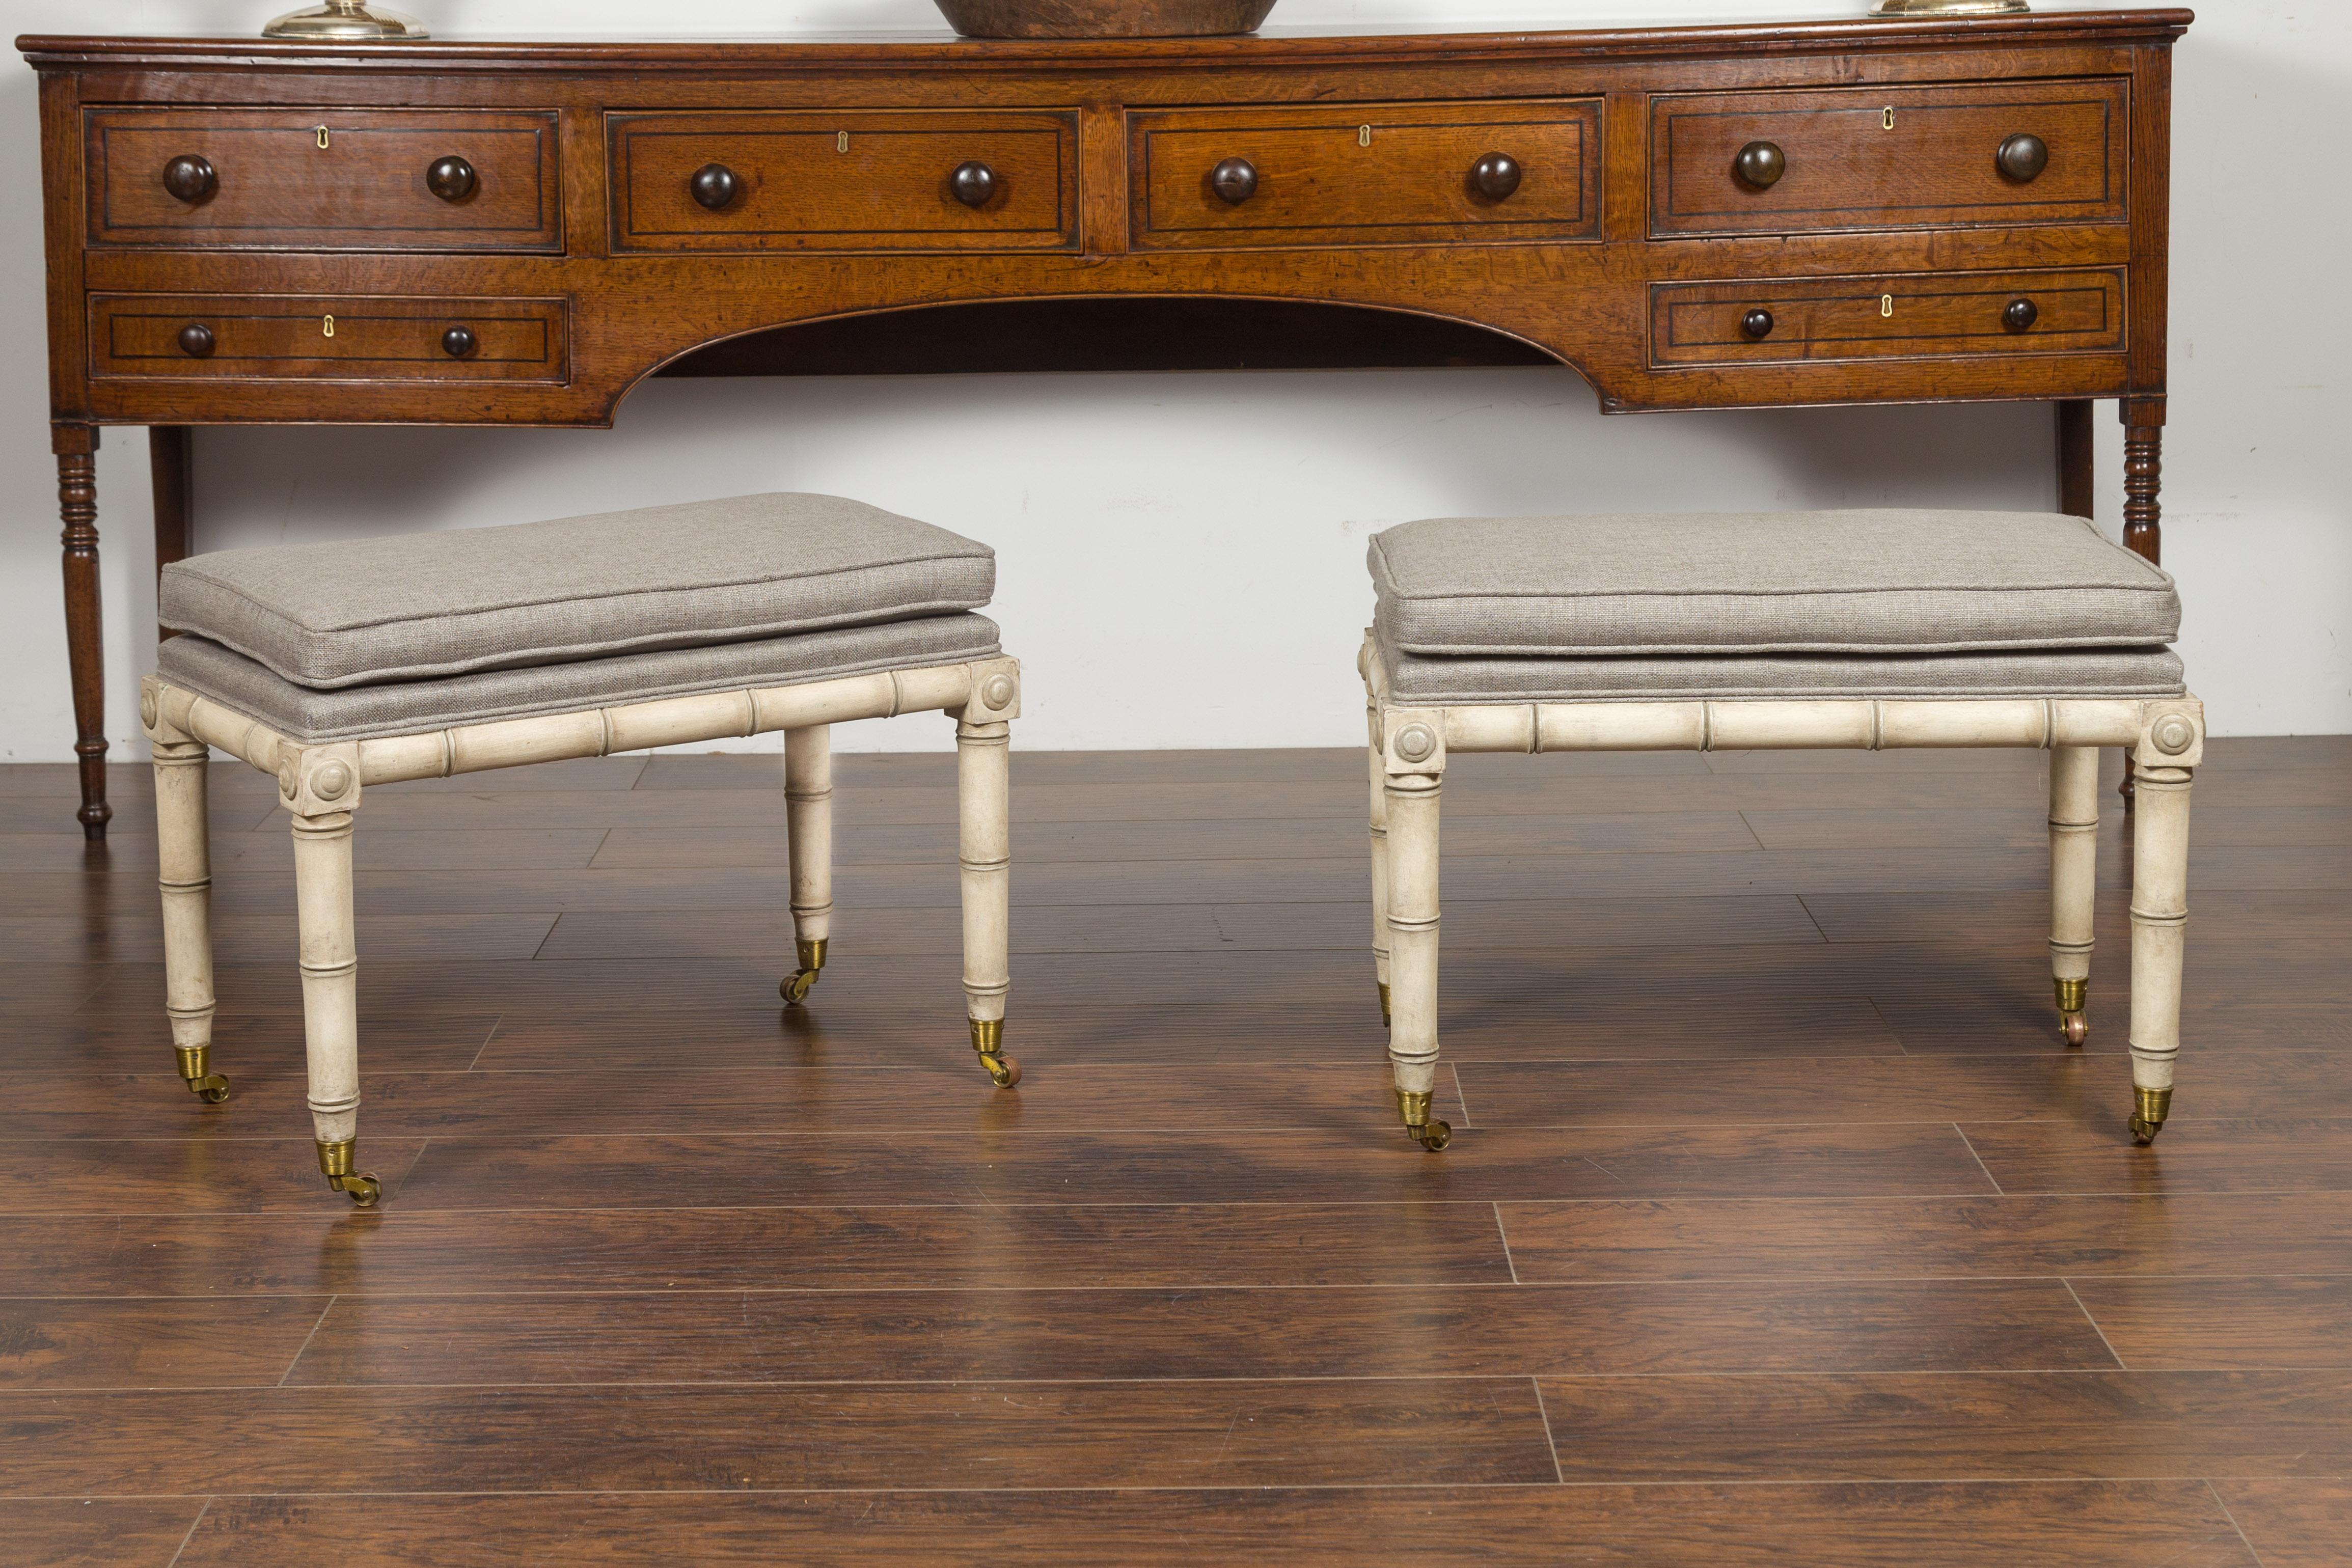 A pair of English vintage painted faux-bamboo benches from the mid-20th century, with carved medallions, casters and new upholstery. Created in England during the midcentury period, each of this pair of freshly painted benches features a rectangular